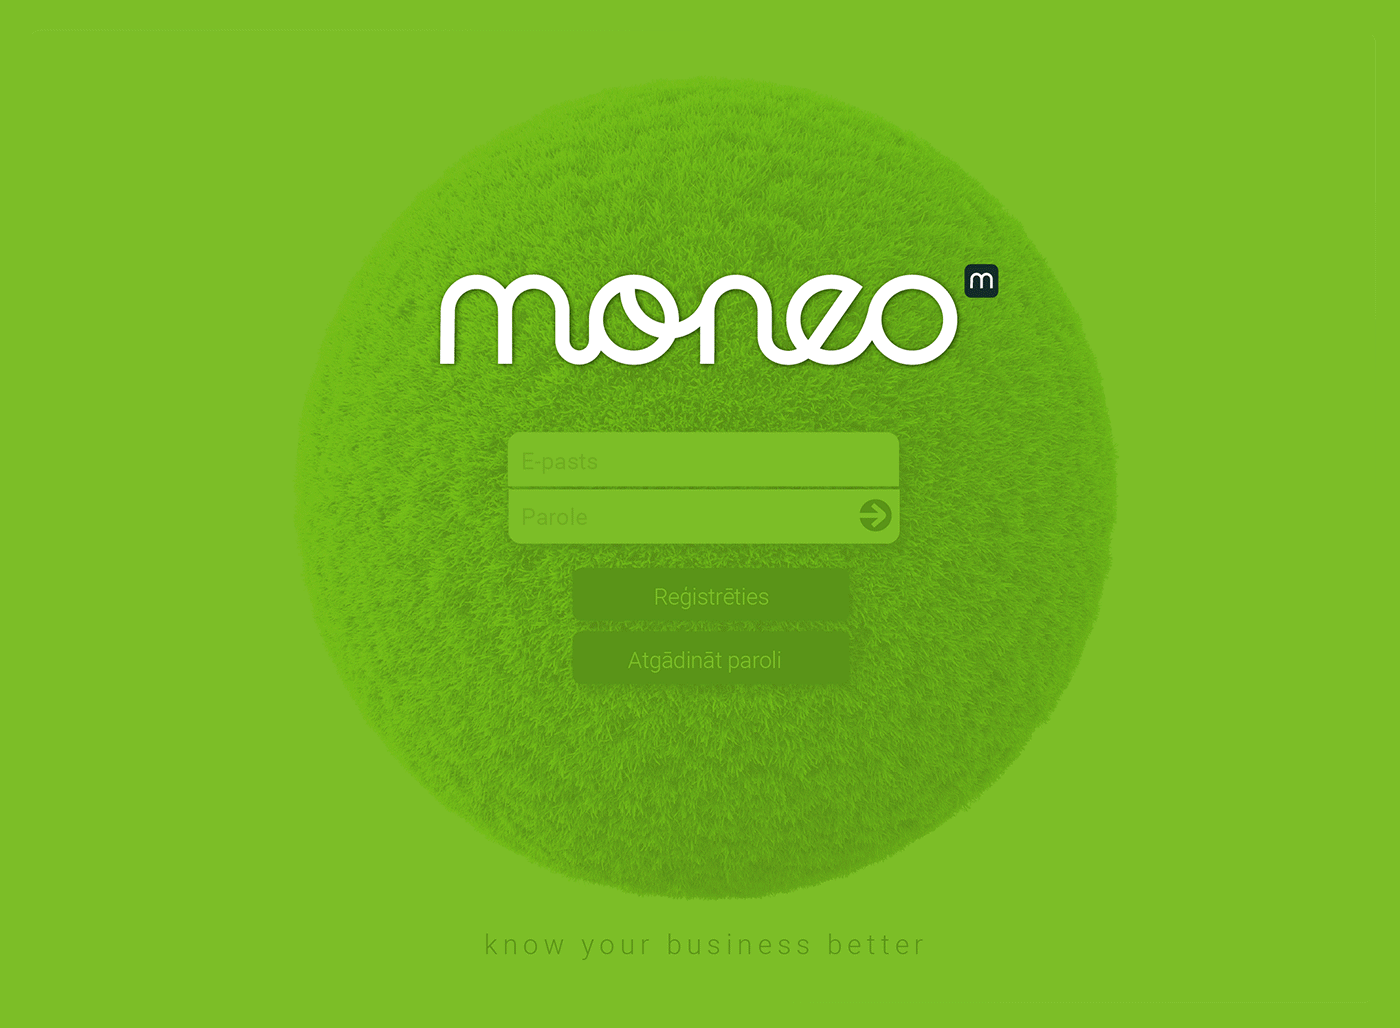 Moneo TypeArt logo handmadefont simplytext caligraphy